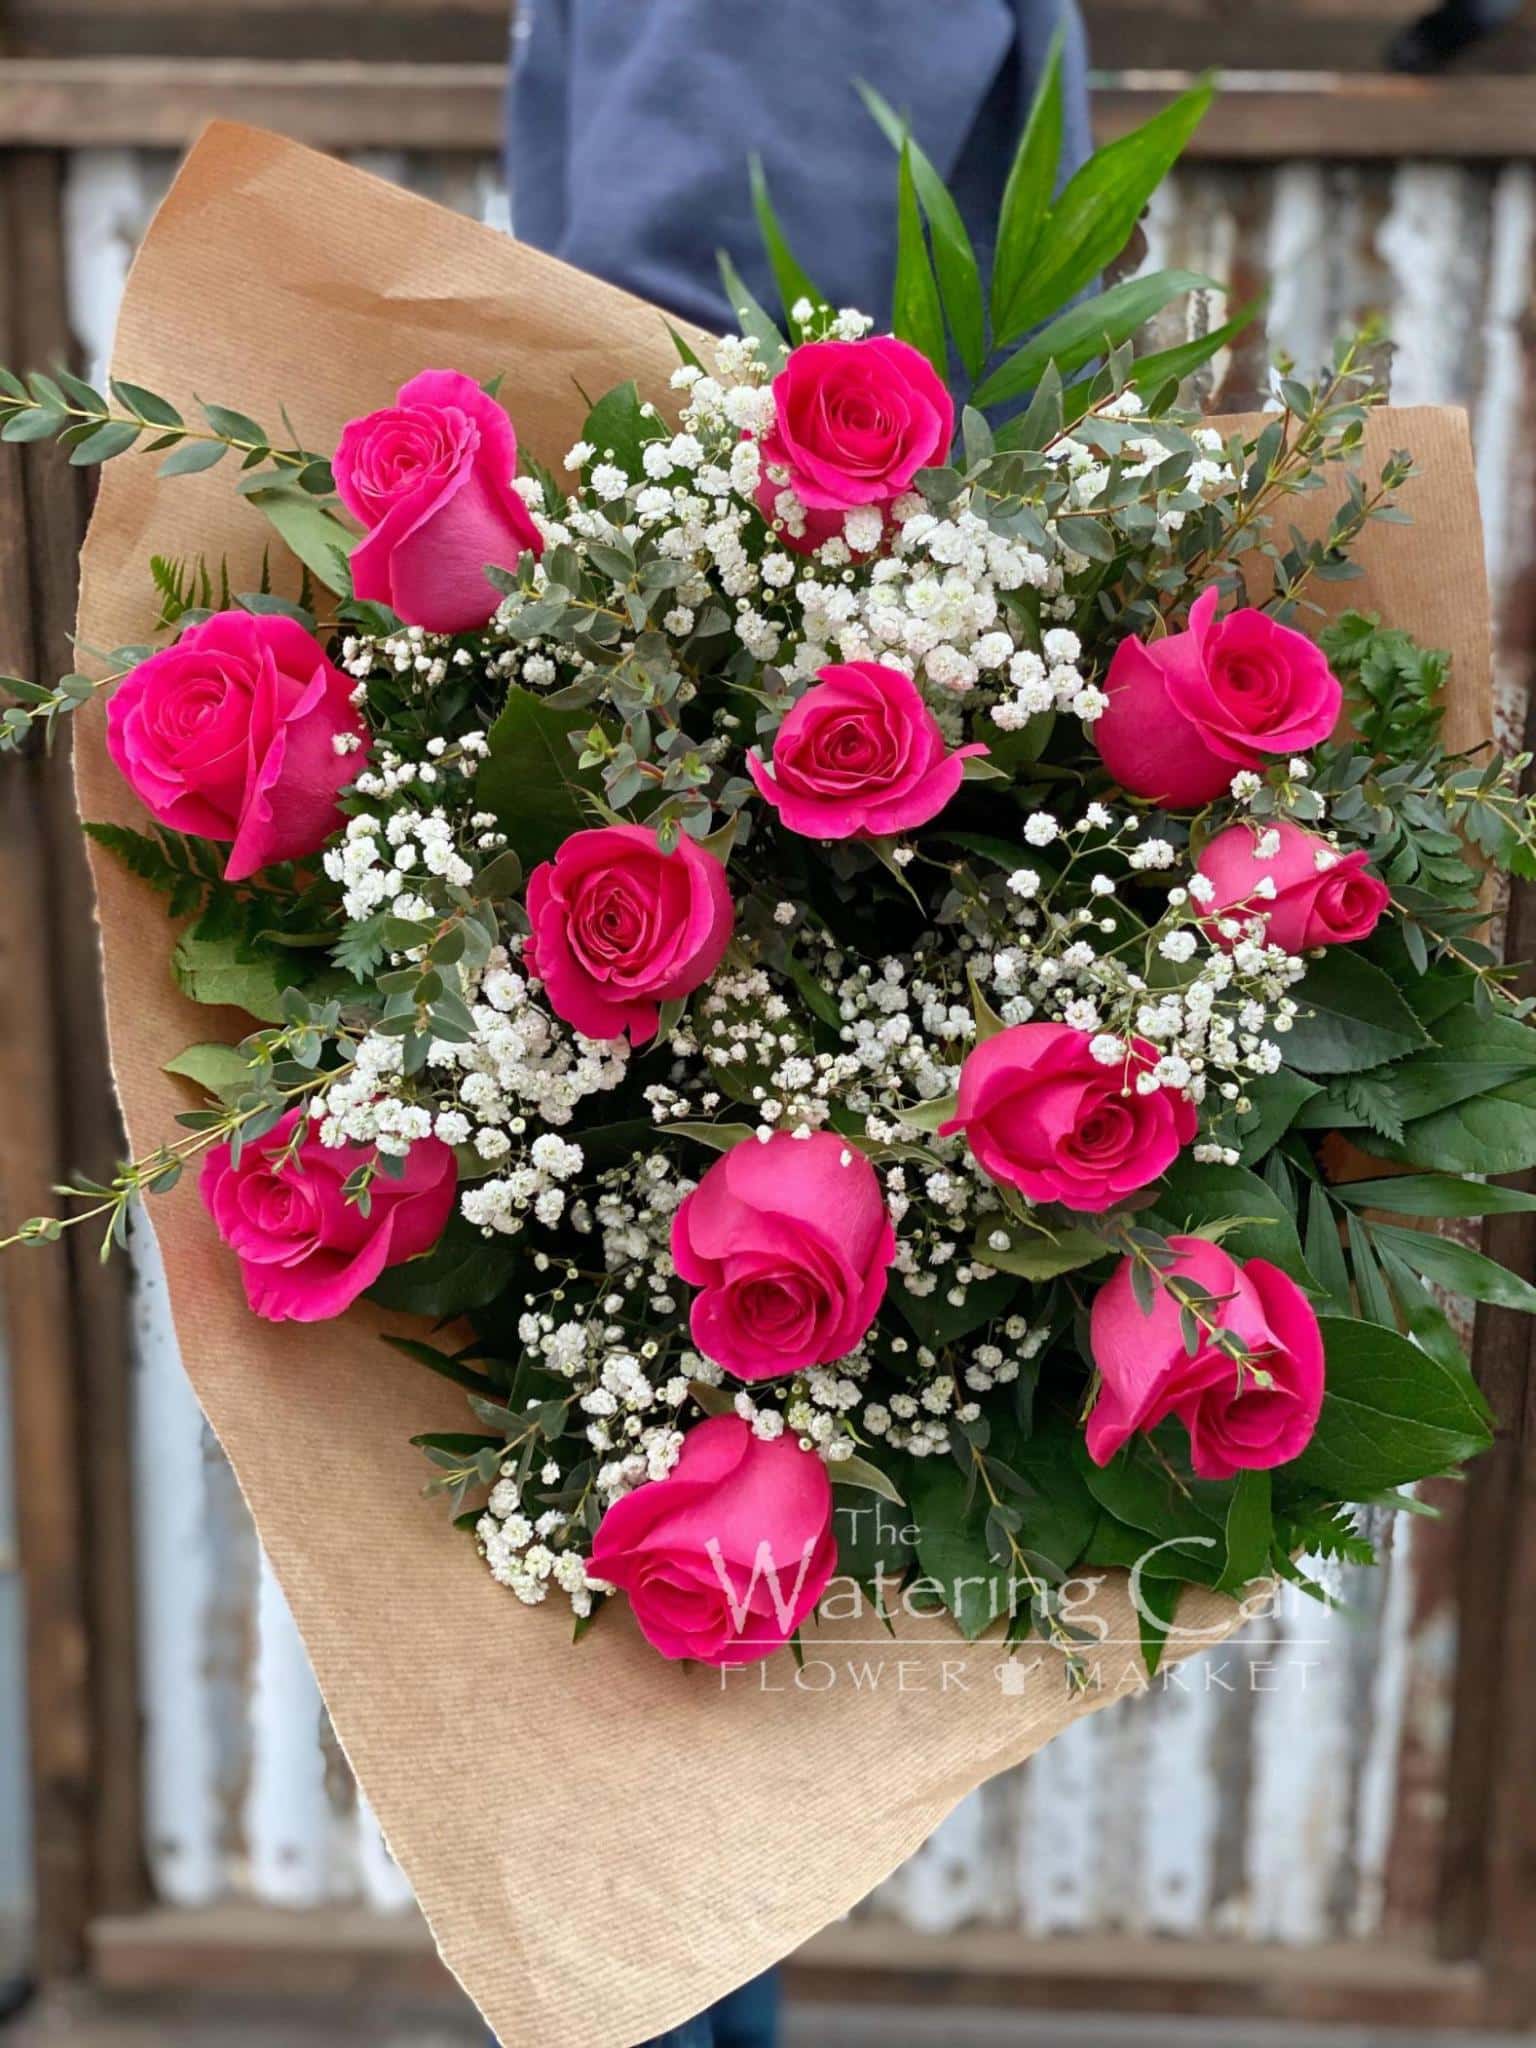 https://thewateringcan.ca/wp-content/uploads/2021/03/One-Dozen-Hot-Pink-Roses-scaled-1-scaled-scaled.jpg